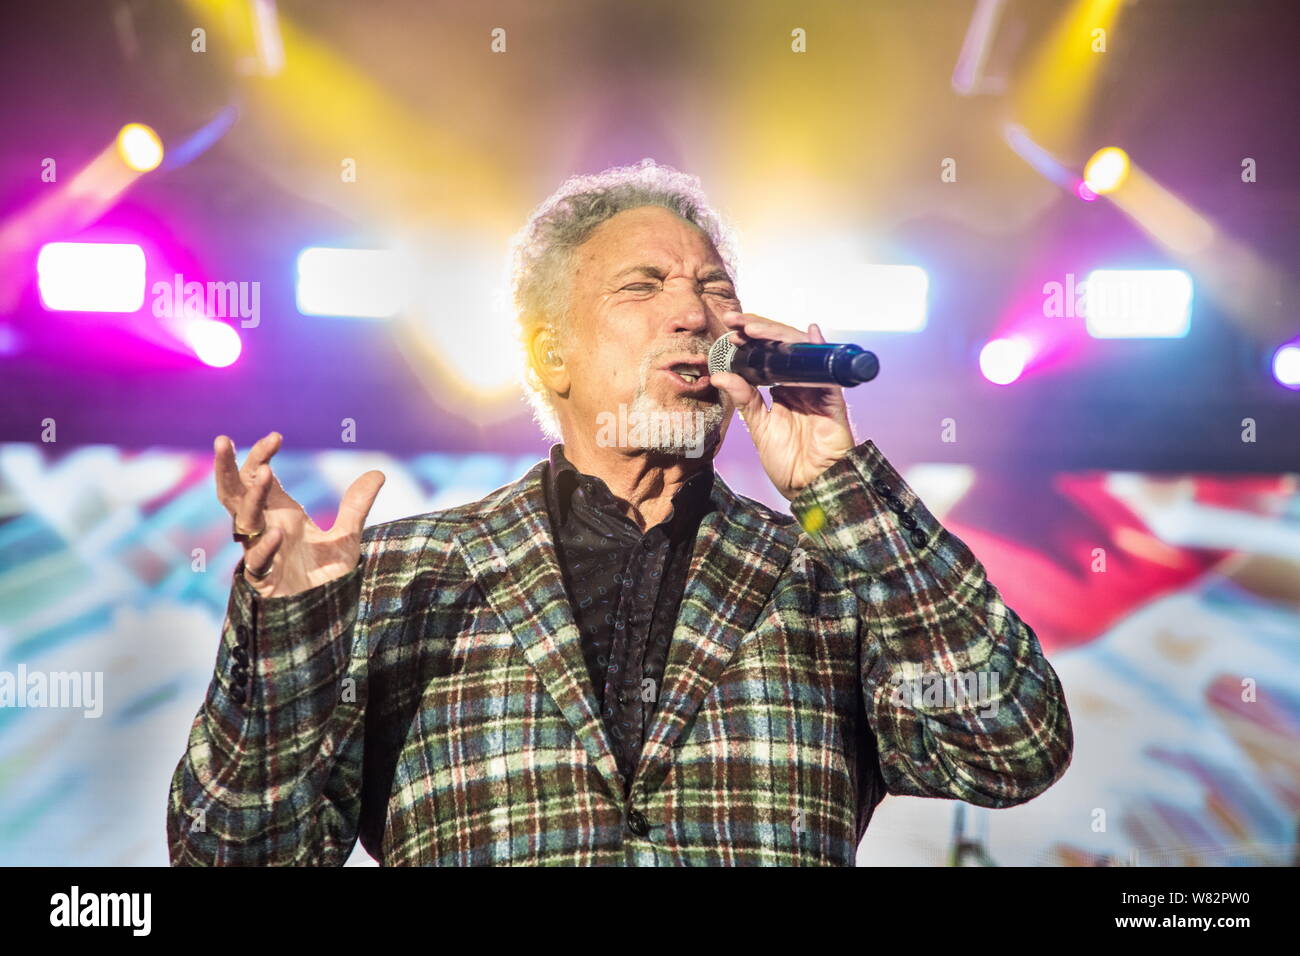 Welsh singer Sir Thomas John Woodward, known by his stage name Tom Jones,  performs during a concert in Hong Kong, China, 25 February 2017 Stock Photo  - Alamy